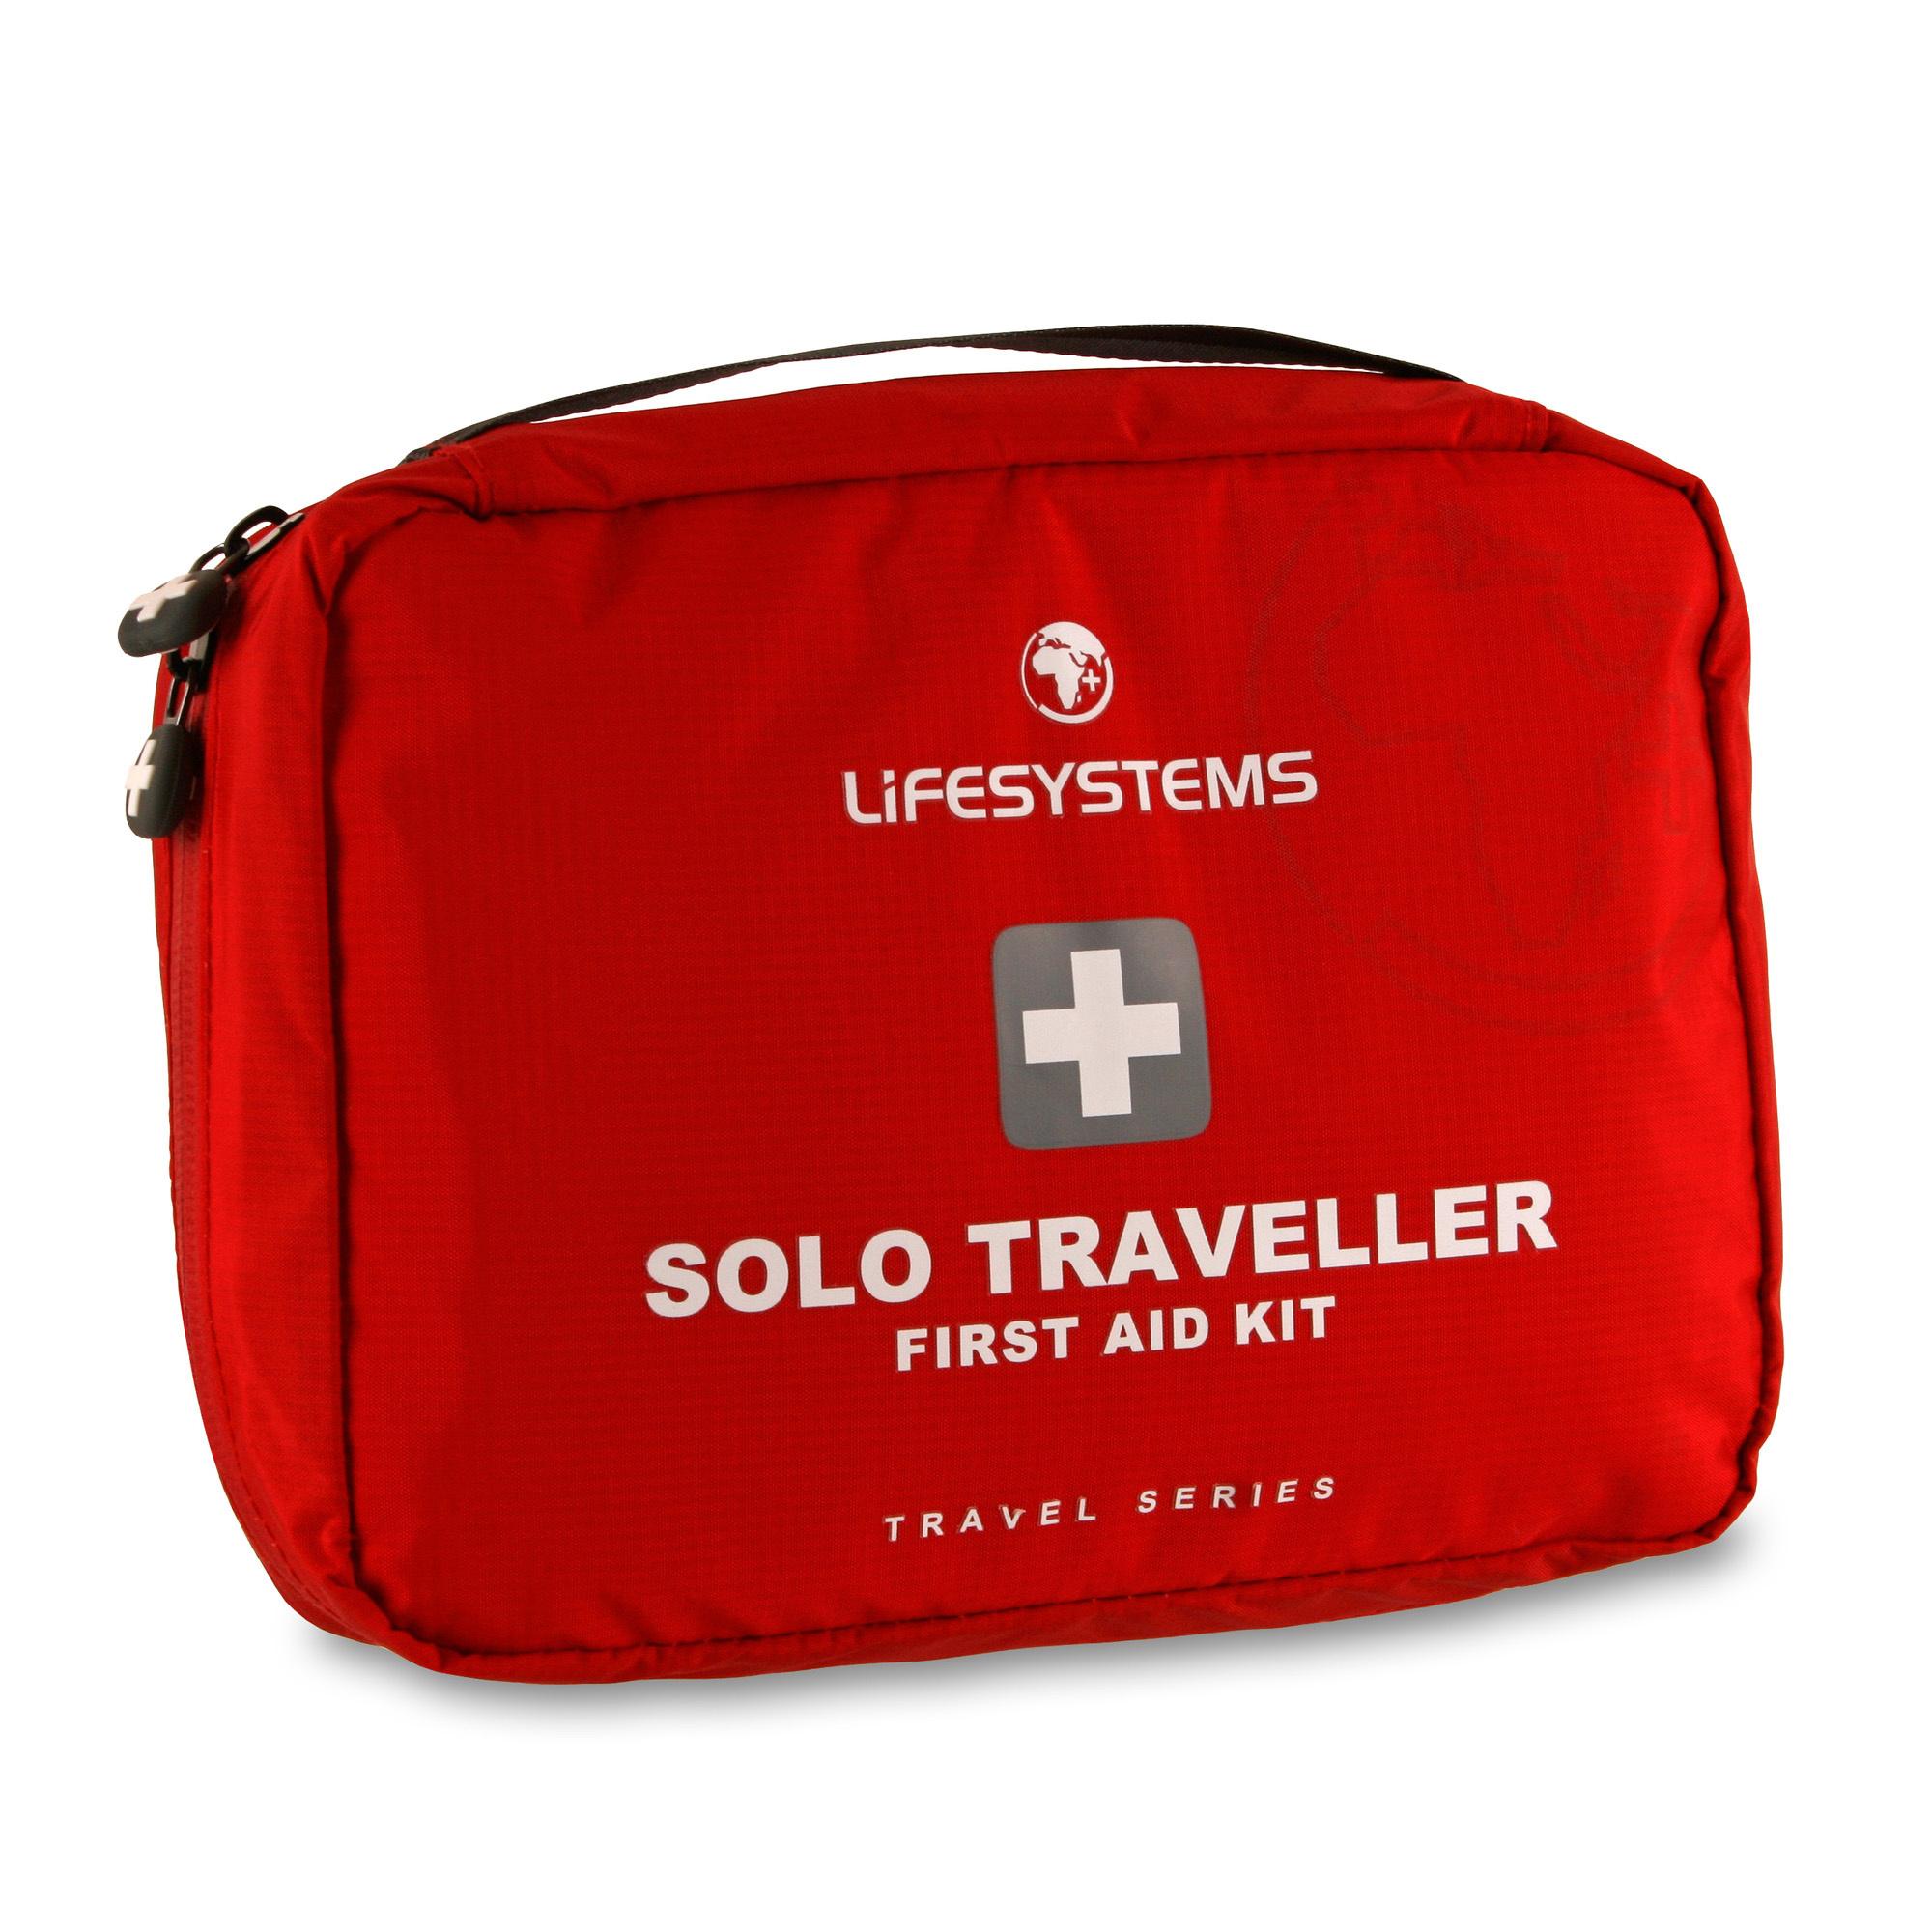 Lifesystems Lifesystems Solo Traveller First Aid Kit - Red, Red